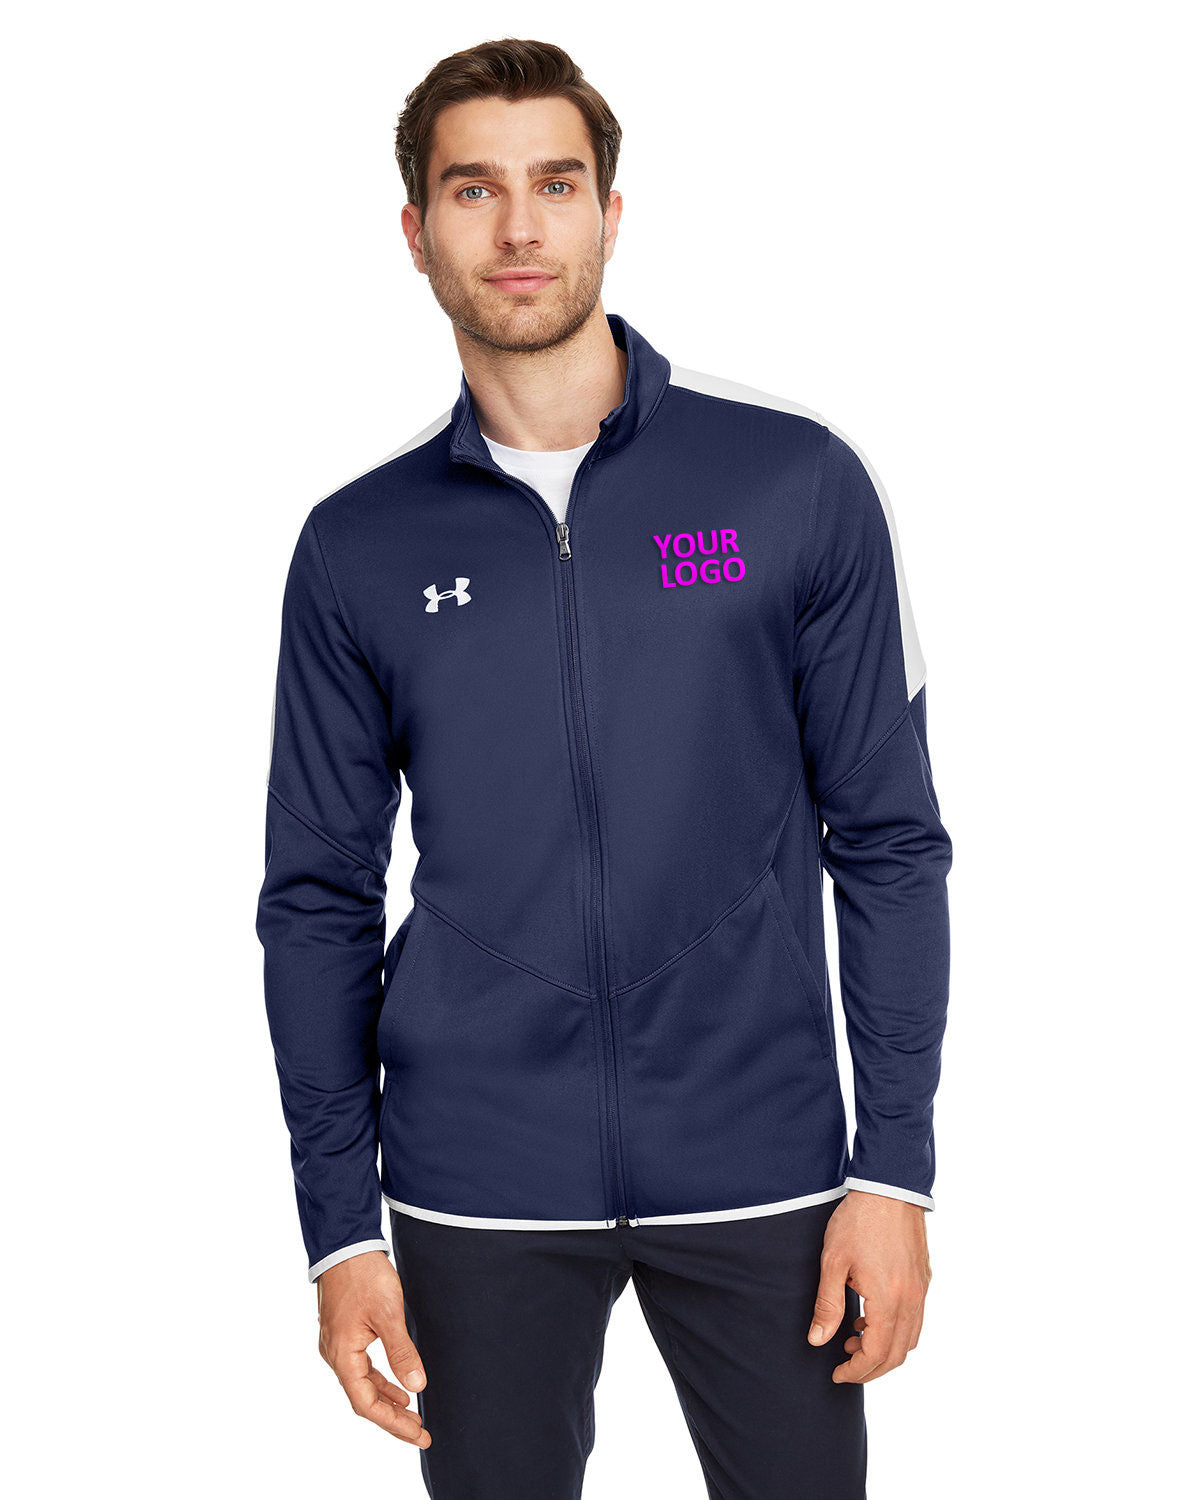 company embroidered jackets Under Armour MIDNGHT NVY 410 1326761